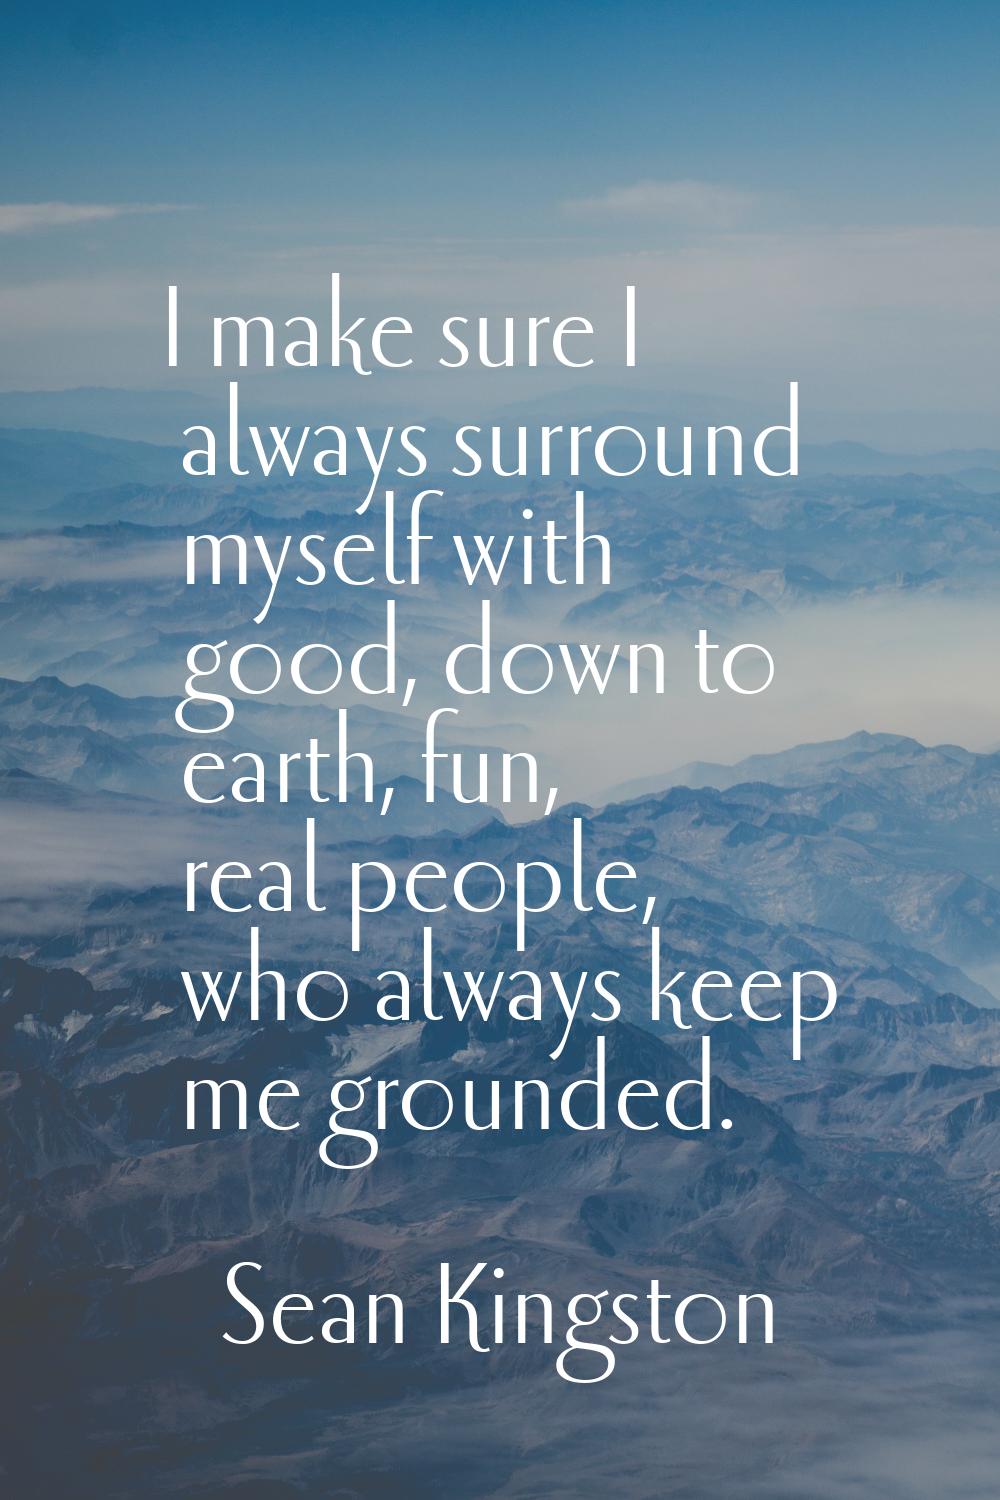 I make sure I always surround myself with good, down to earth, fun, real people, who always keep me